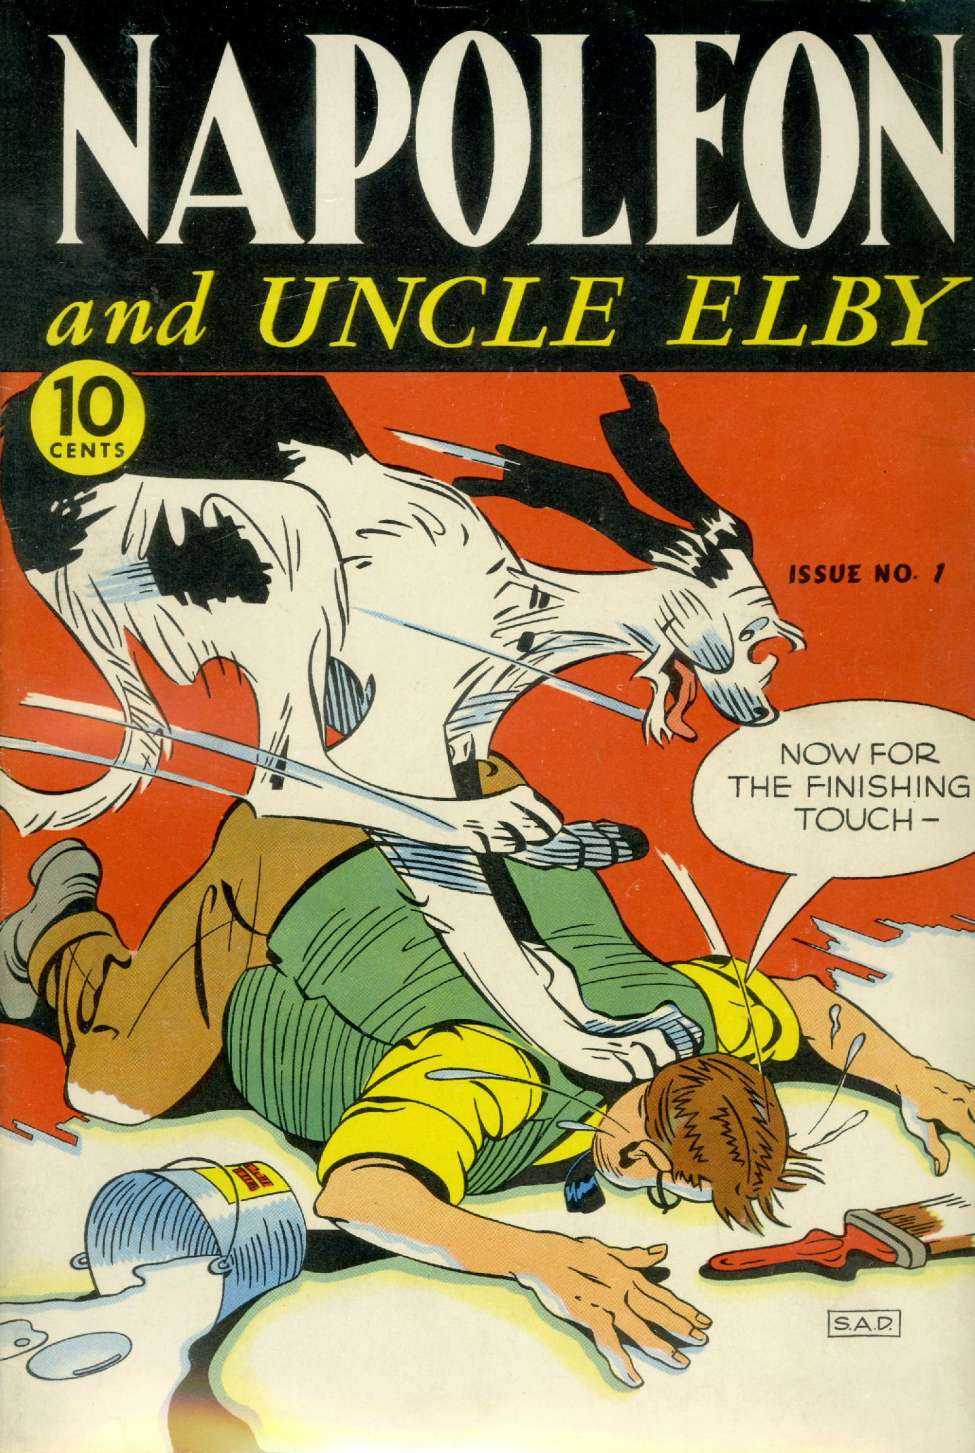 Book Cover For Napoleon and Uncle Elby 1